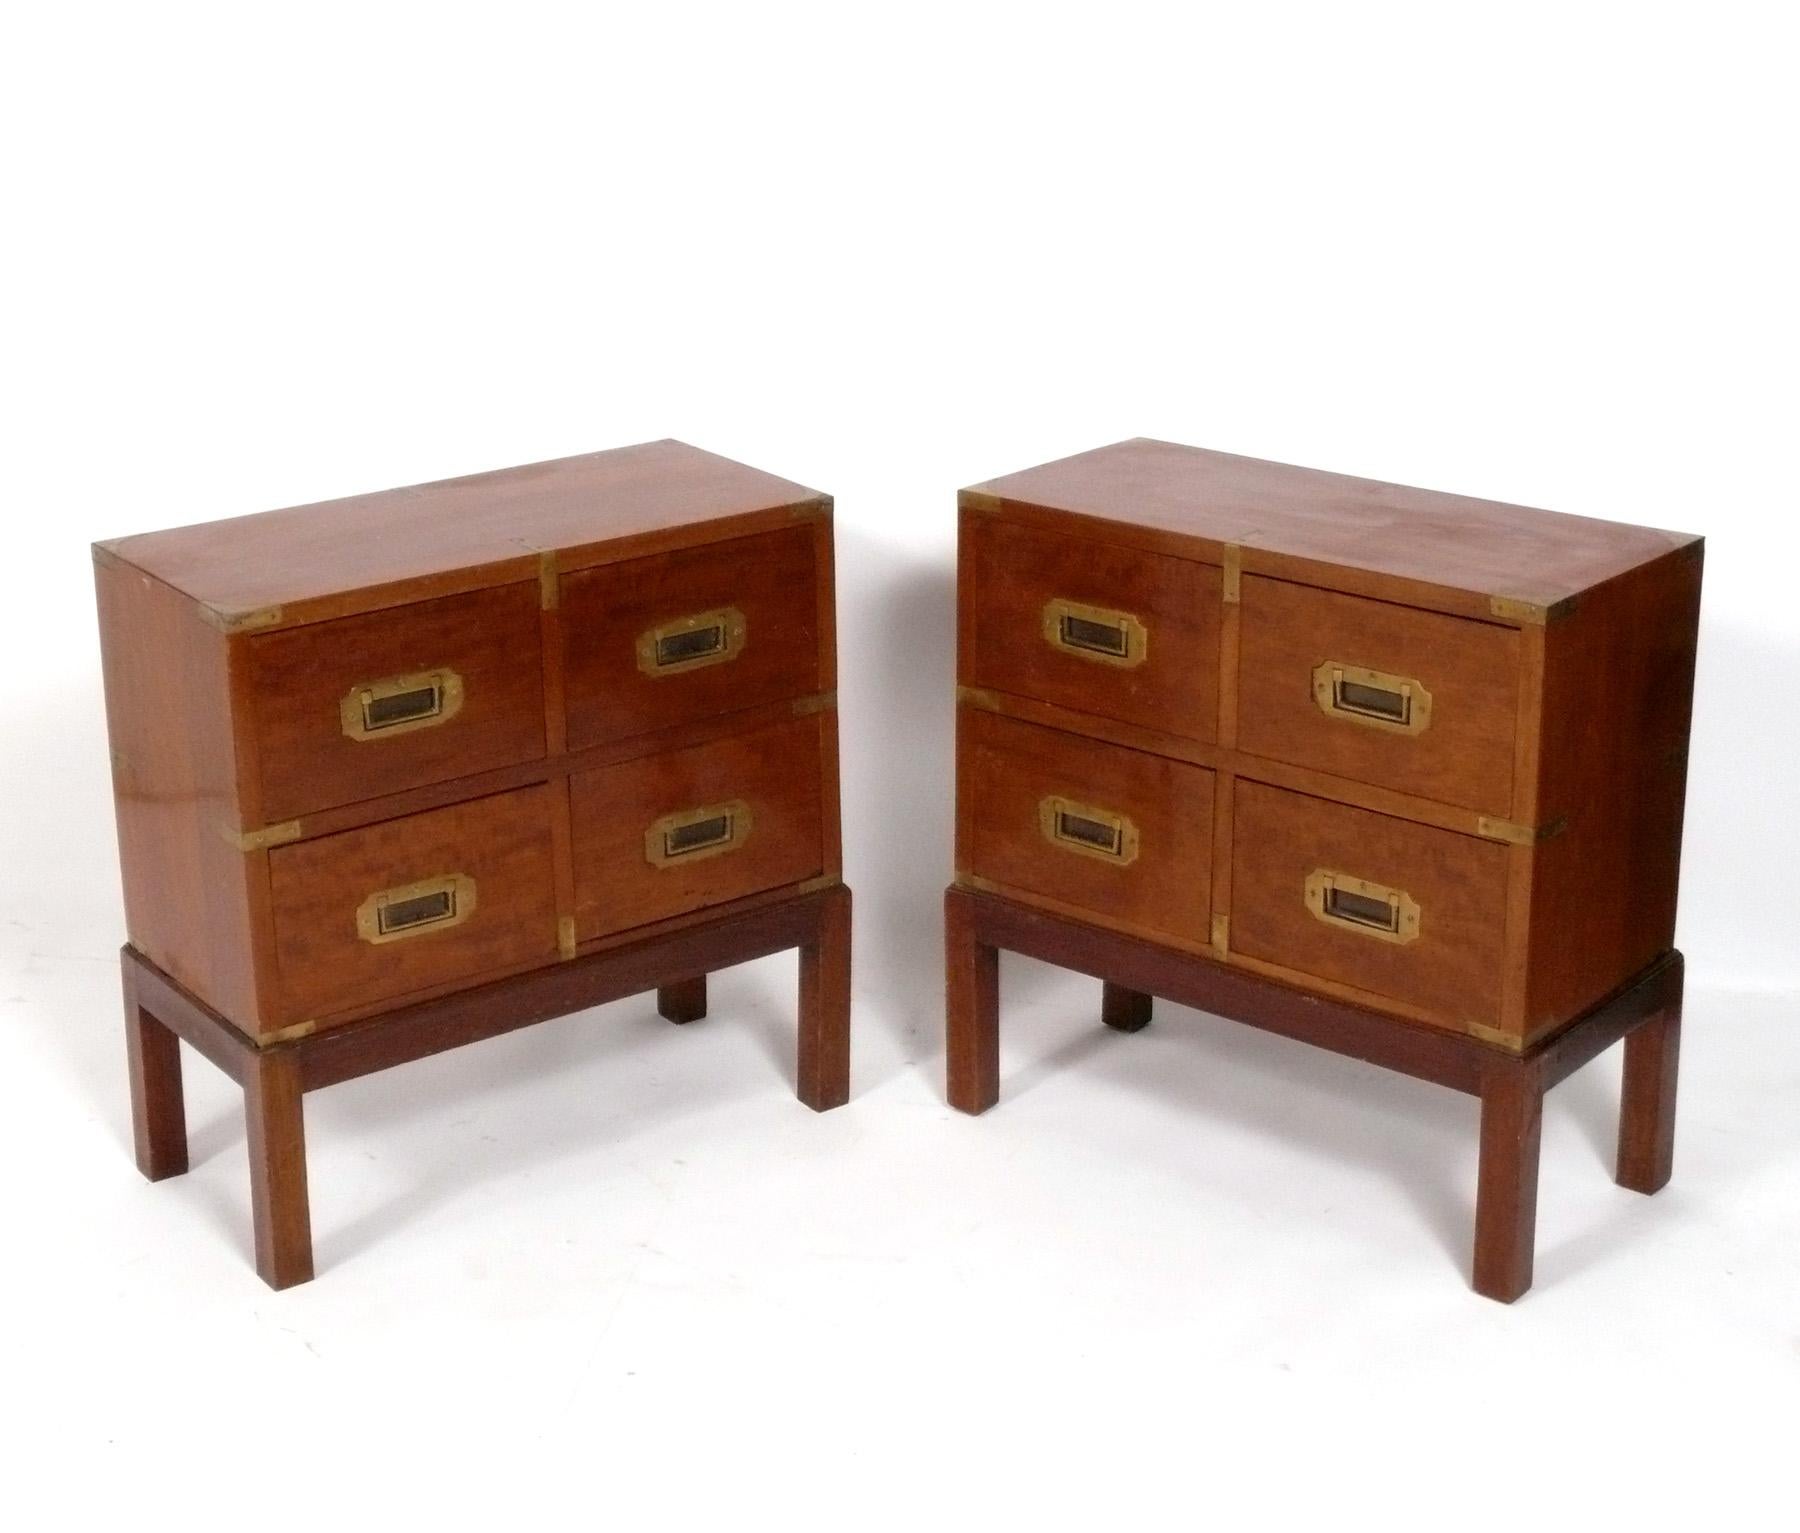 Pair of Campaign Chests or End Tables, believed to be English, circa 19th Century. They are a versatile size and can be used as side or end tables, or as nightstands.